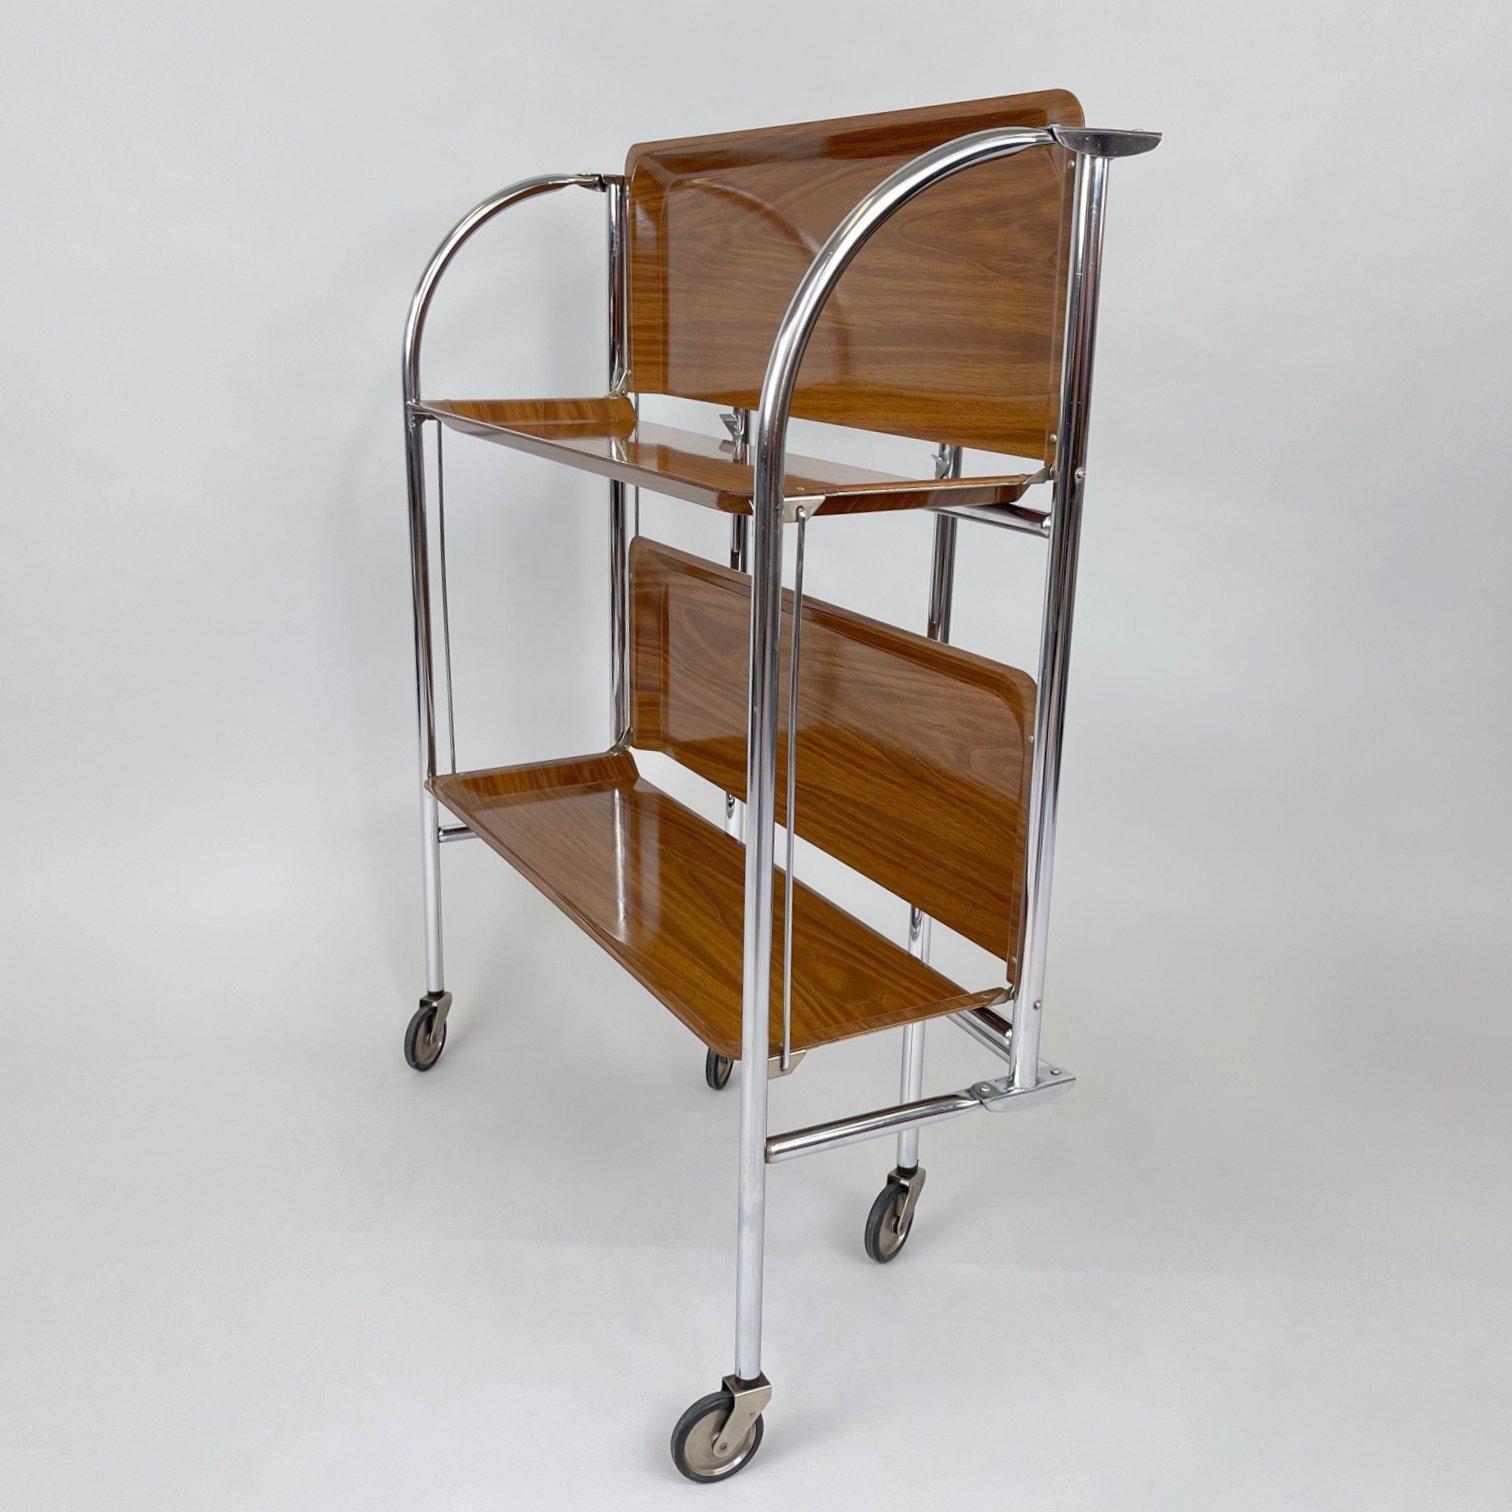 20th Century Mid-Century Vintage Chrome and Plywood Folding Serving Trolley, 1950's For Sale